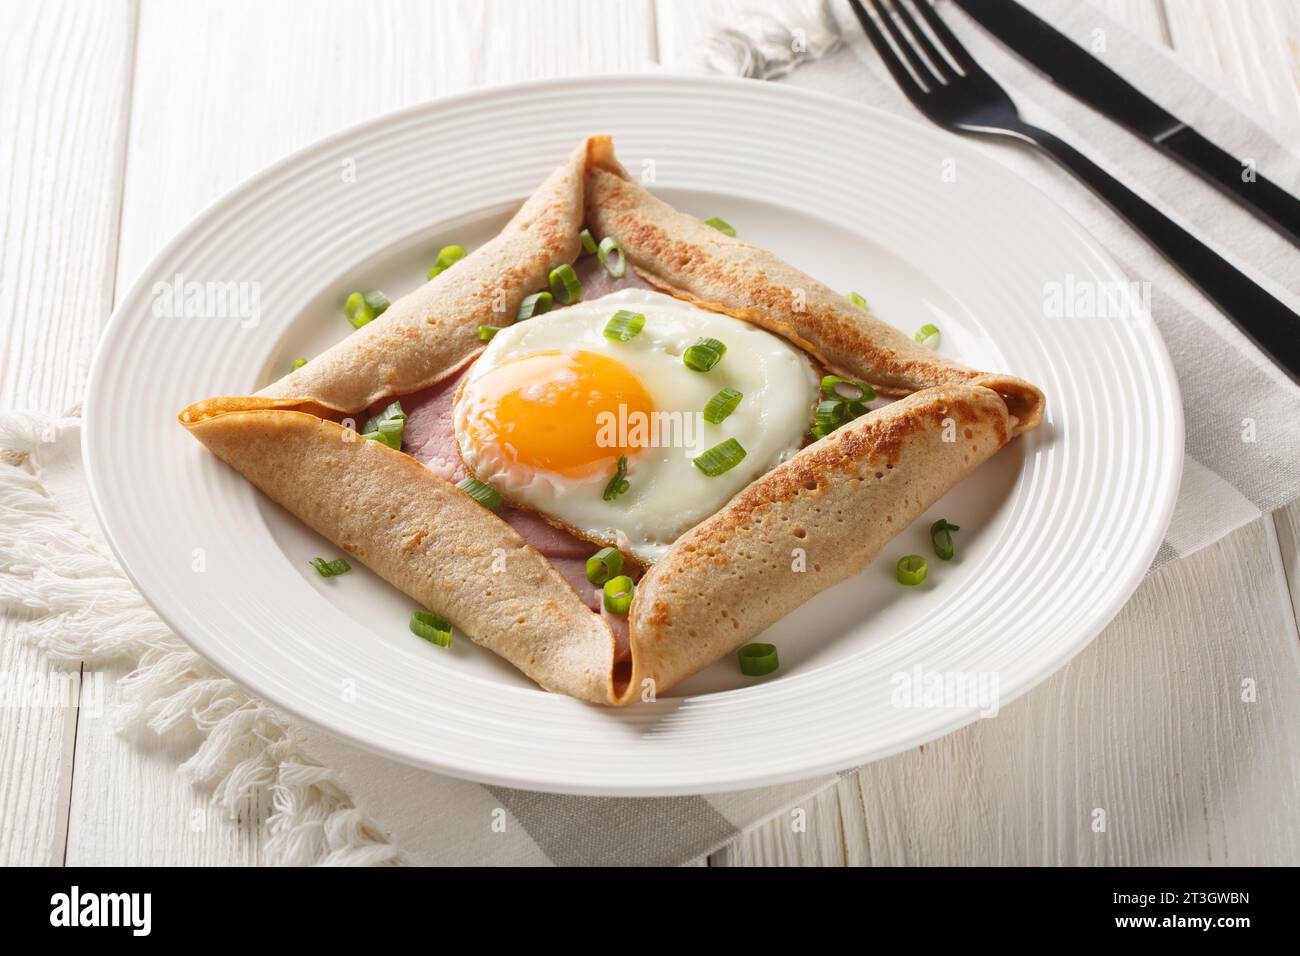 Breton crepe, Savory Buckwheat Galettes Bretonnes with fried egg, cheese, ham closeup on the plate on the table. Horizontal Stock Photo